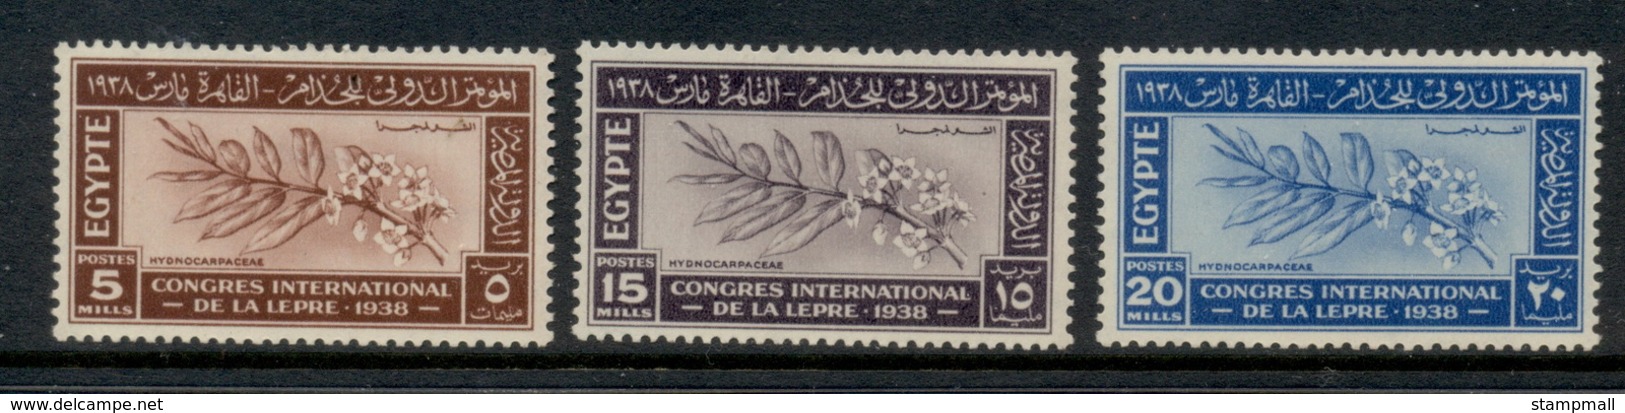 Egypt 1938 Leprosy Congress MLH - Unused Stamps